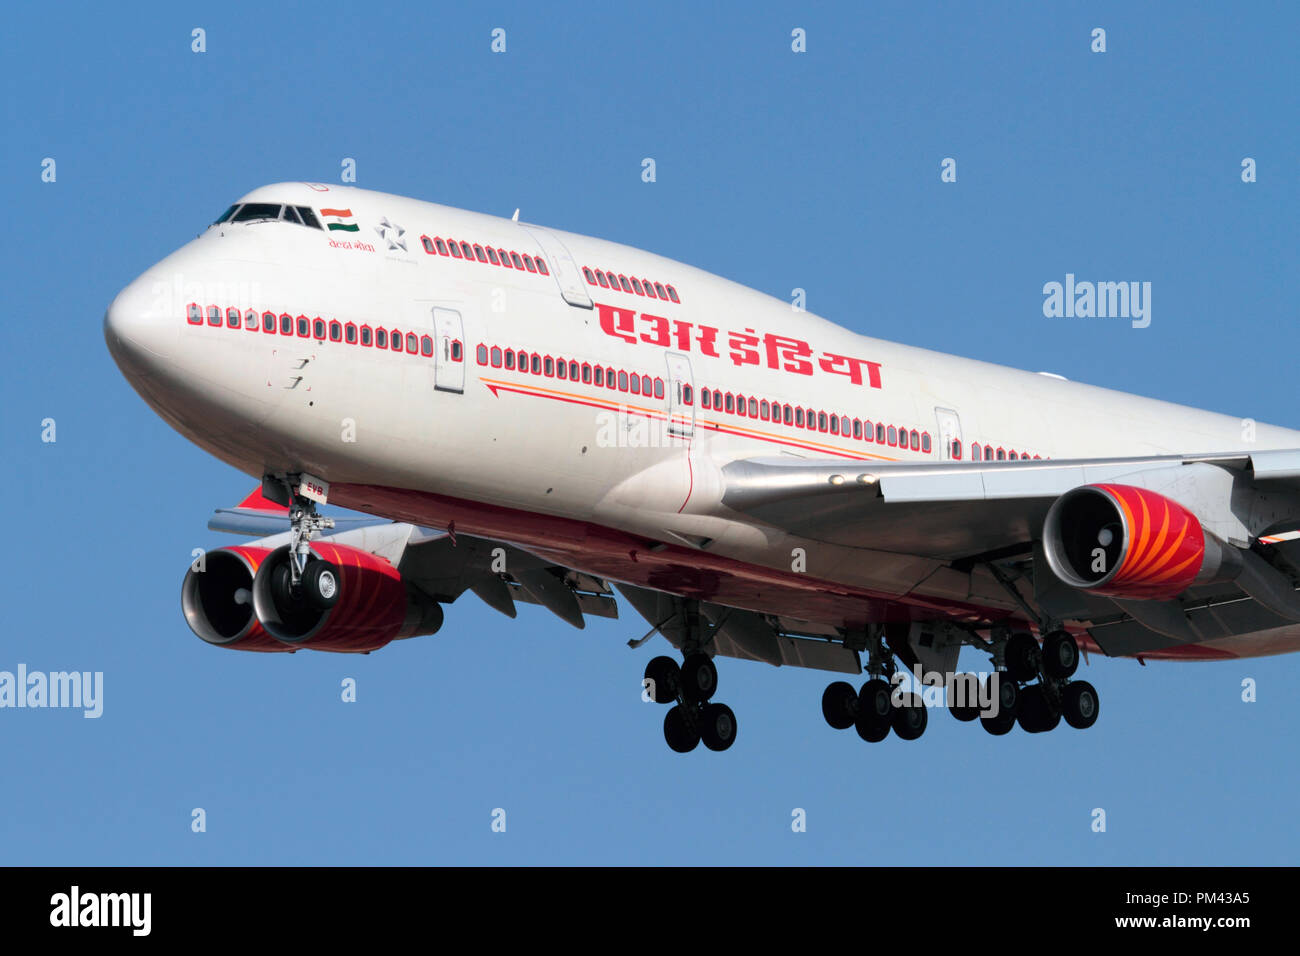 Air India Boeing 747-400 jumbo jet long haul airliner on approach. Closeup front view. Stock Photo